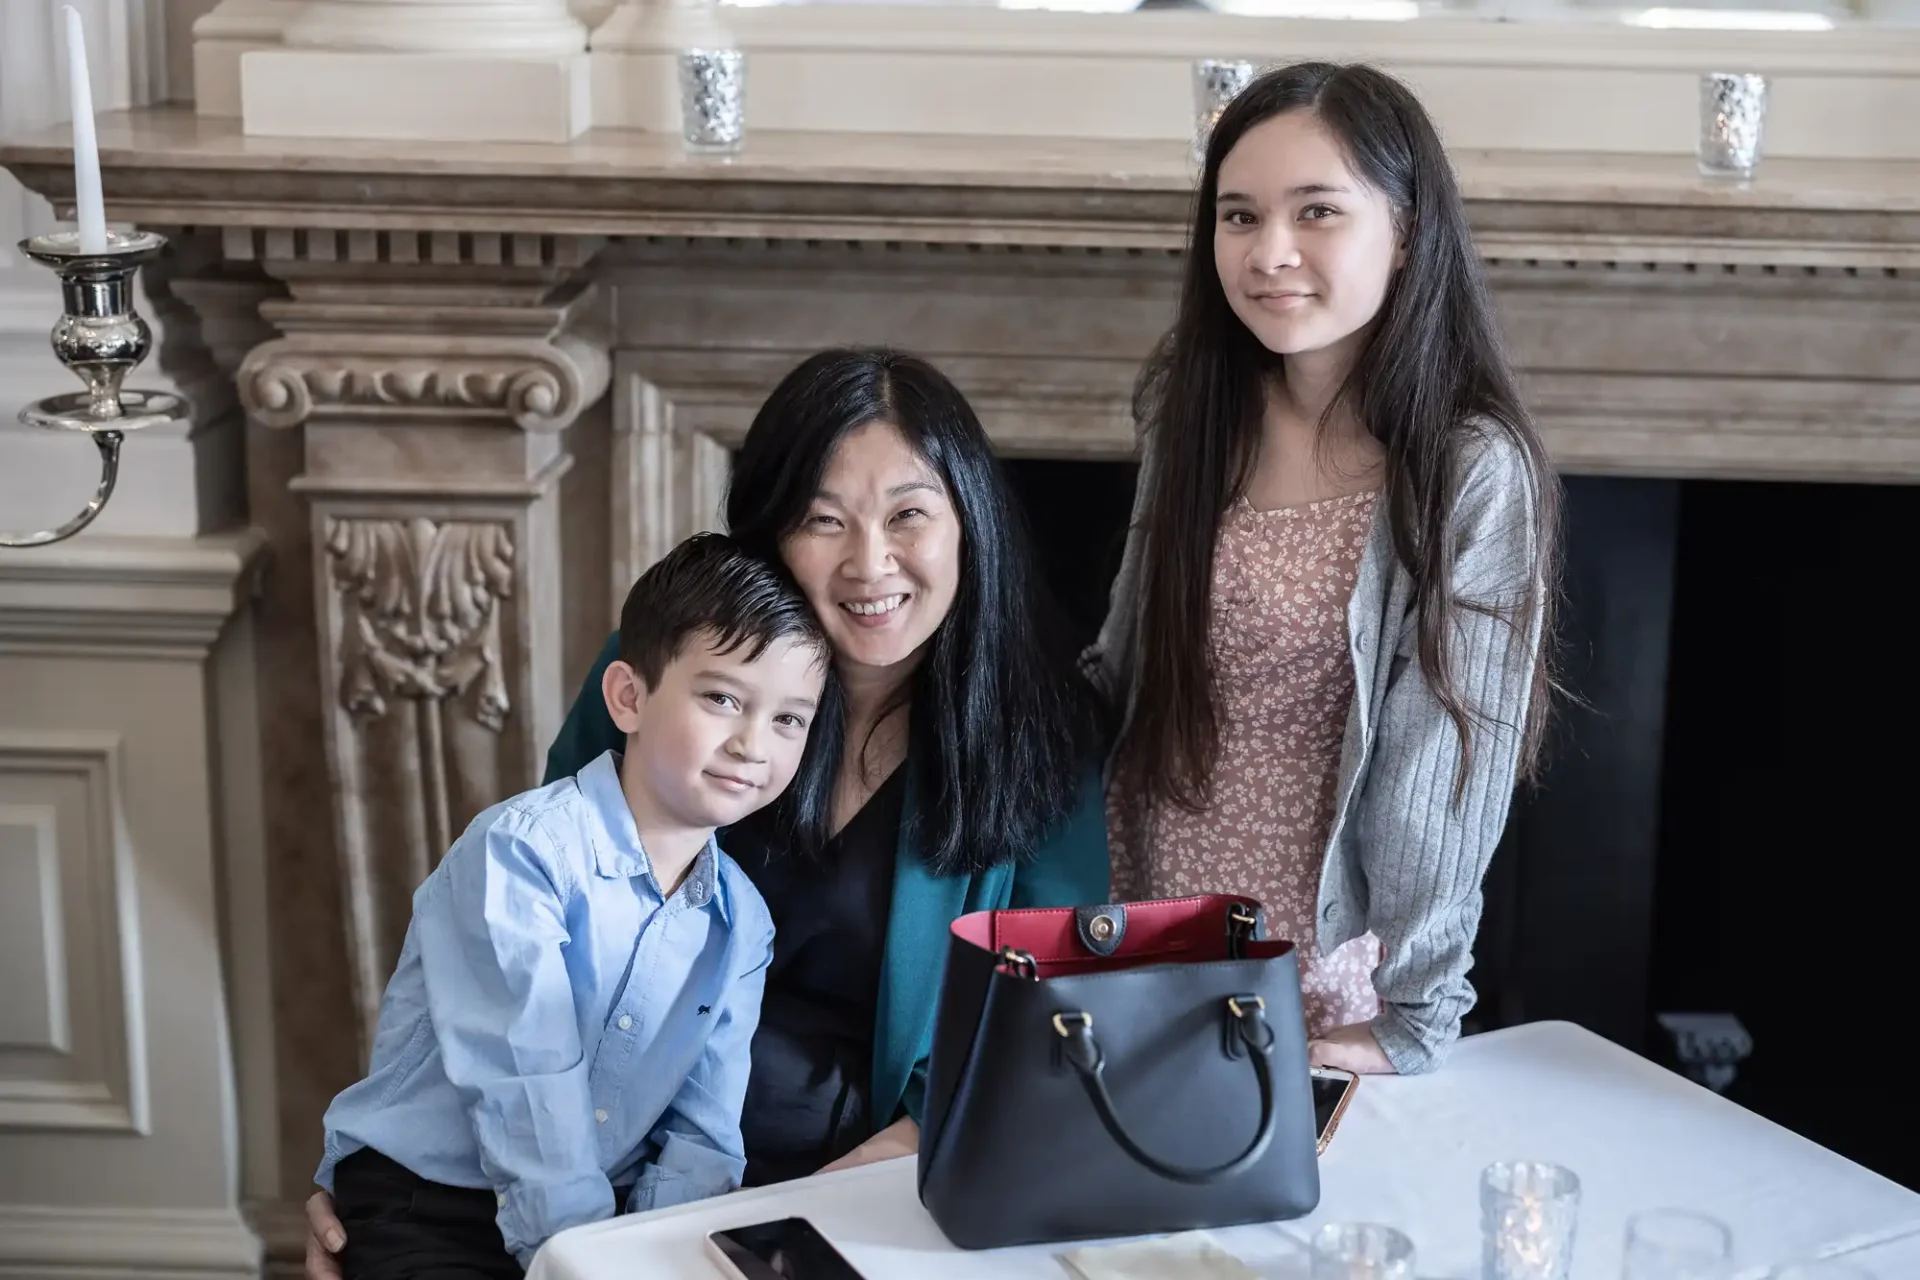 A woman and two children smiling at a dining table in an elegant room, with a stylish handbag placed on the table.